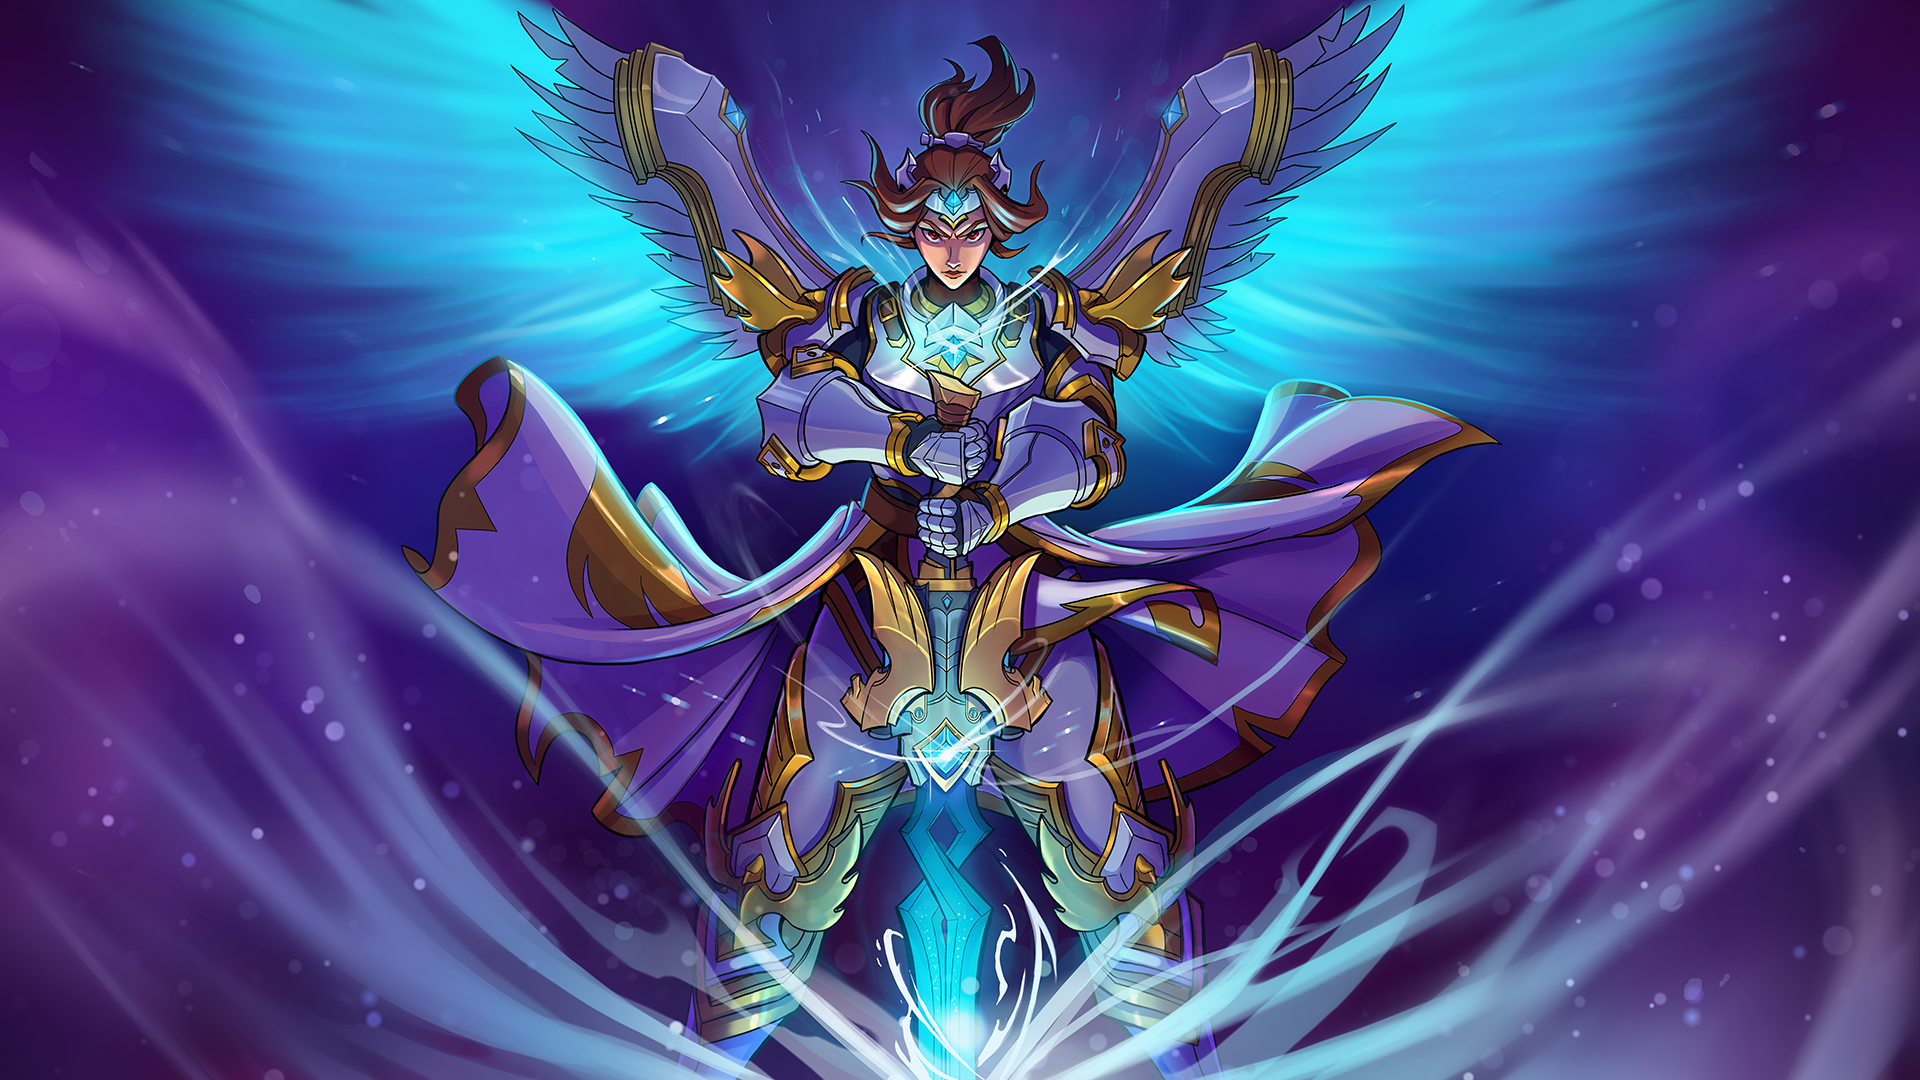 Furia wallpaper created by André Art